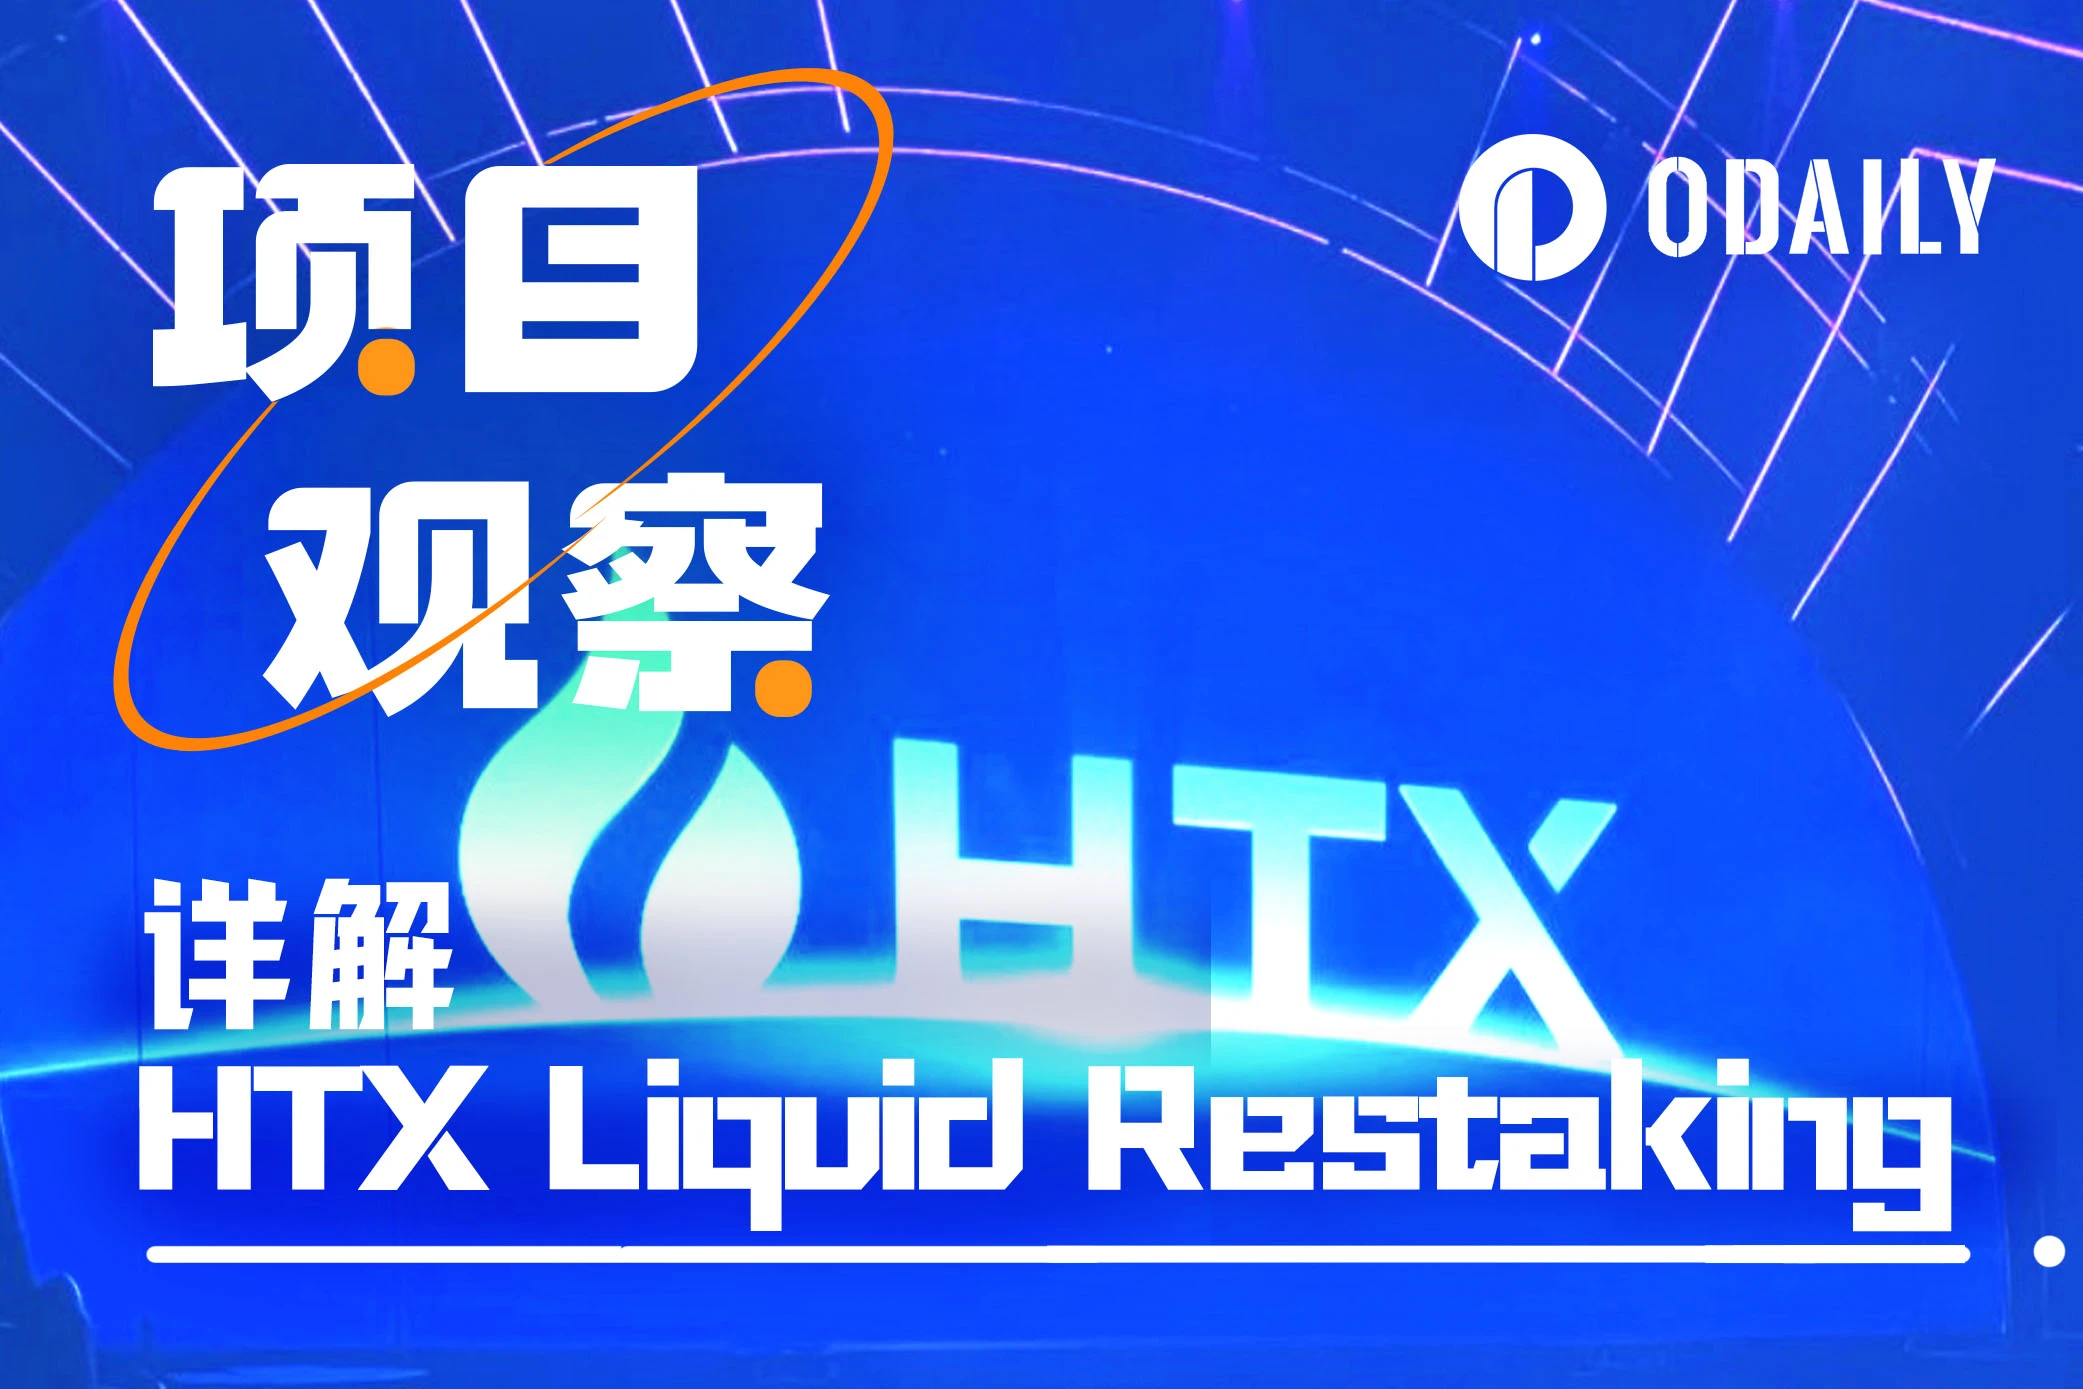 Detailed explanation of HTX Liquid Restaking: the industrys first CeFi+DeFi restaking solution